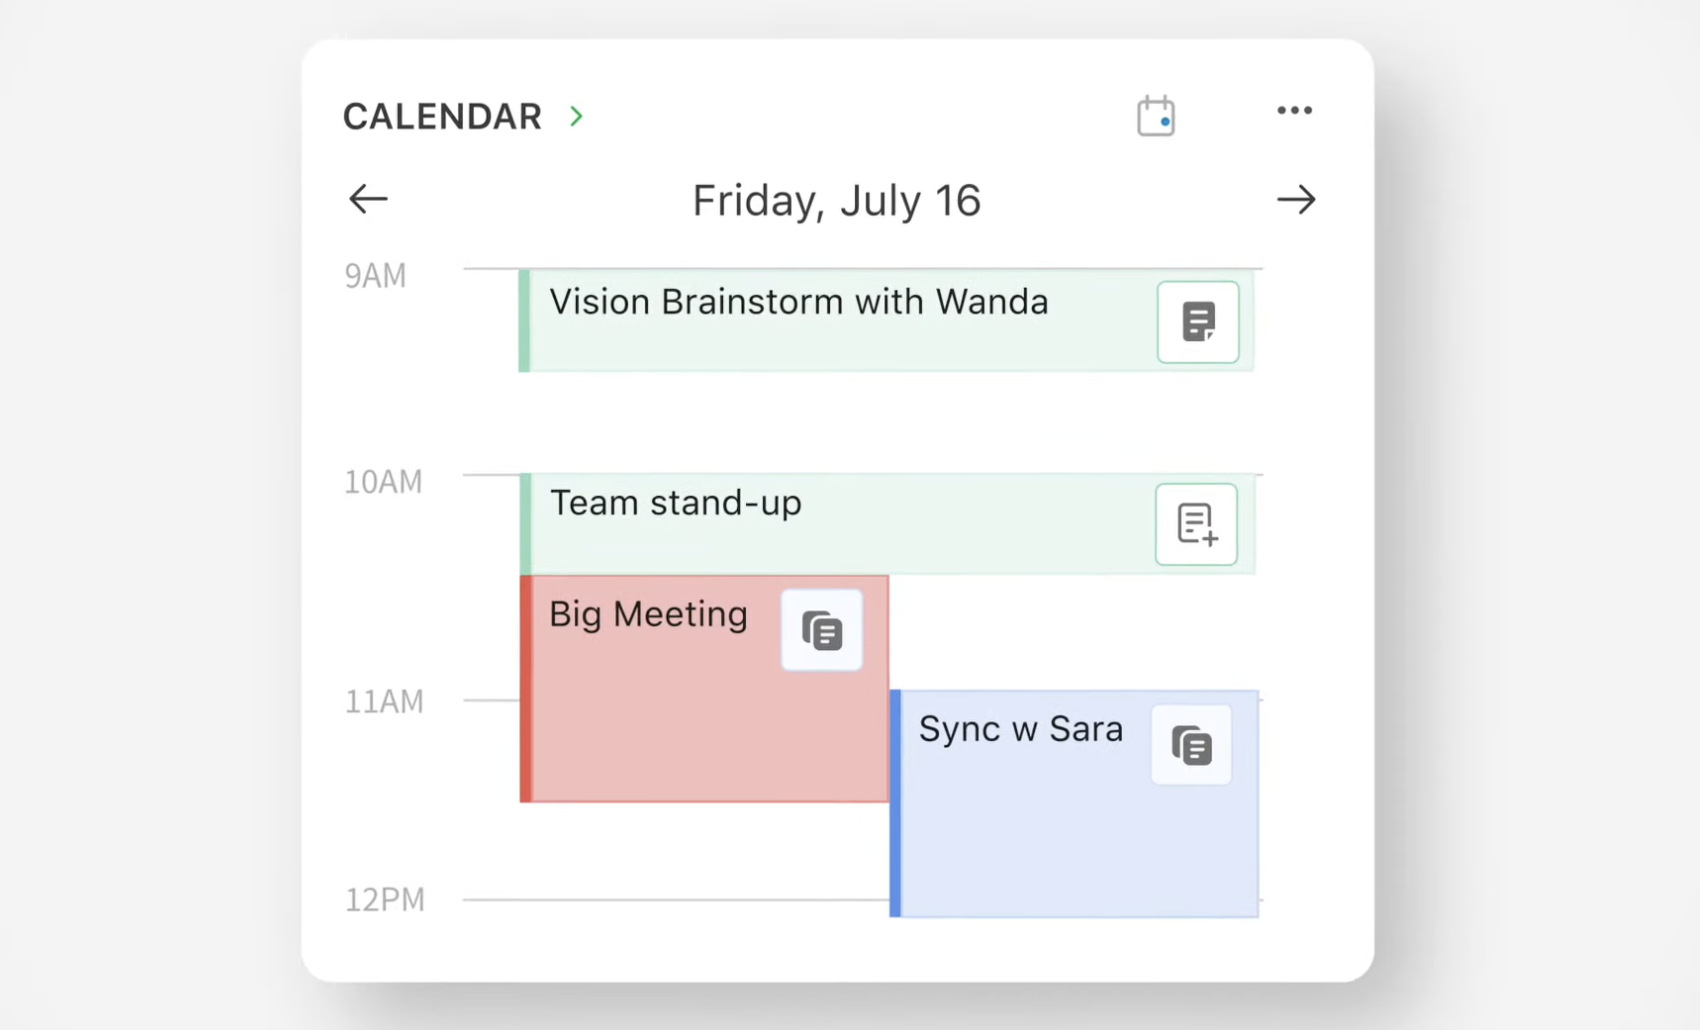 Connect your calendar to Evernote